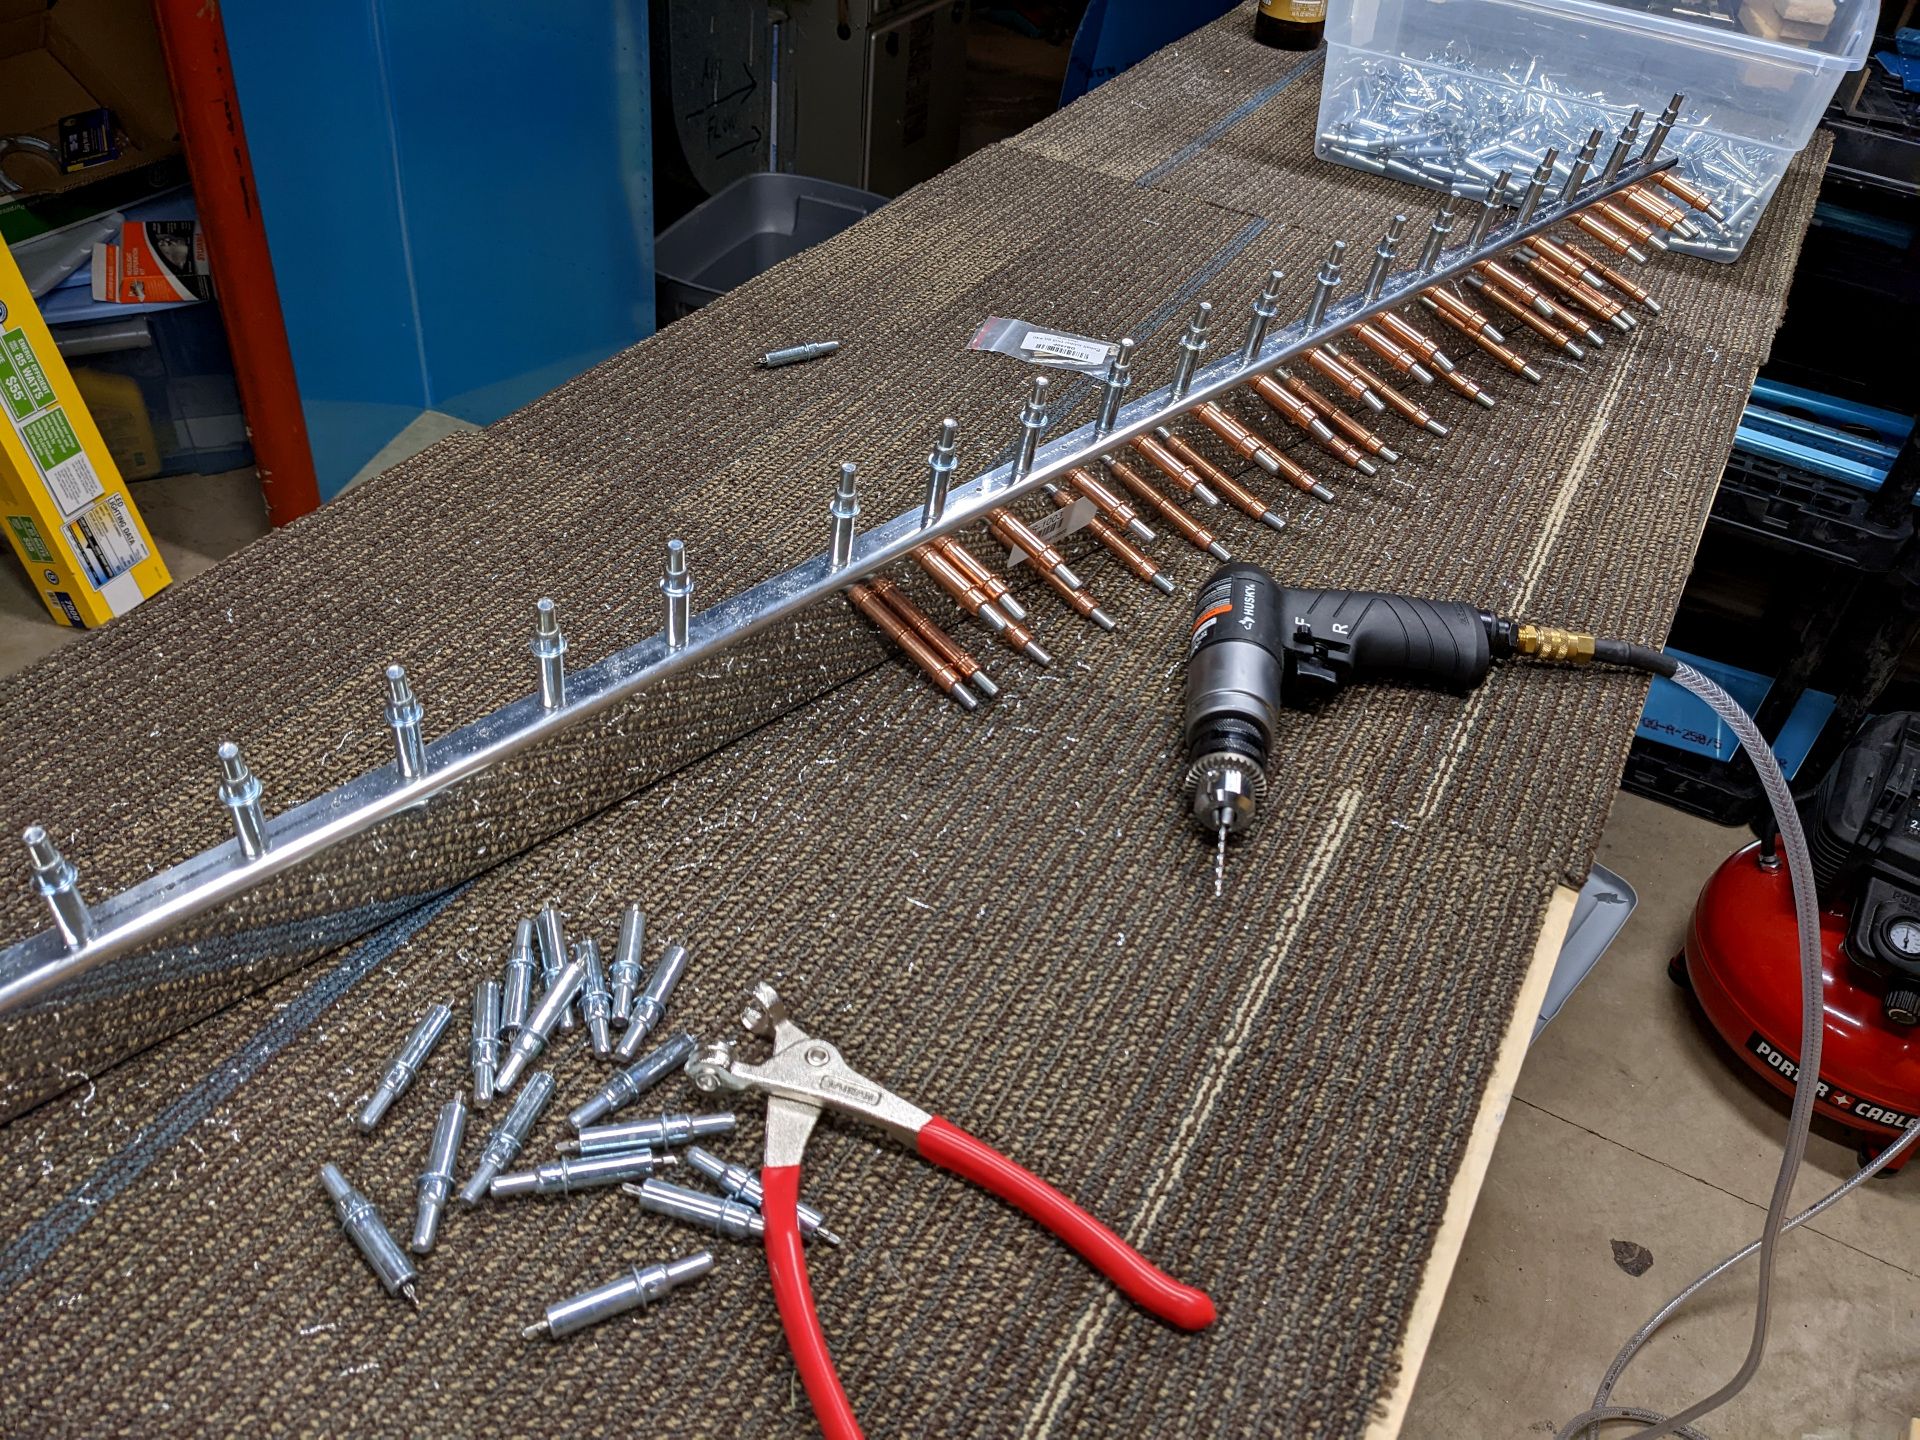 Aluminum parts connected with two different color clecos. A pair of cleco pliers sits near a pile of silver clecos. An air drill also sits on the work table